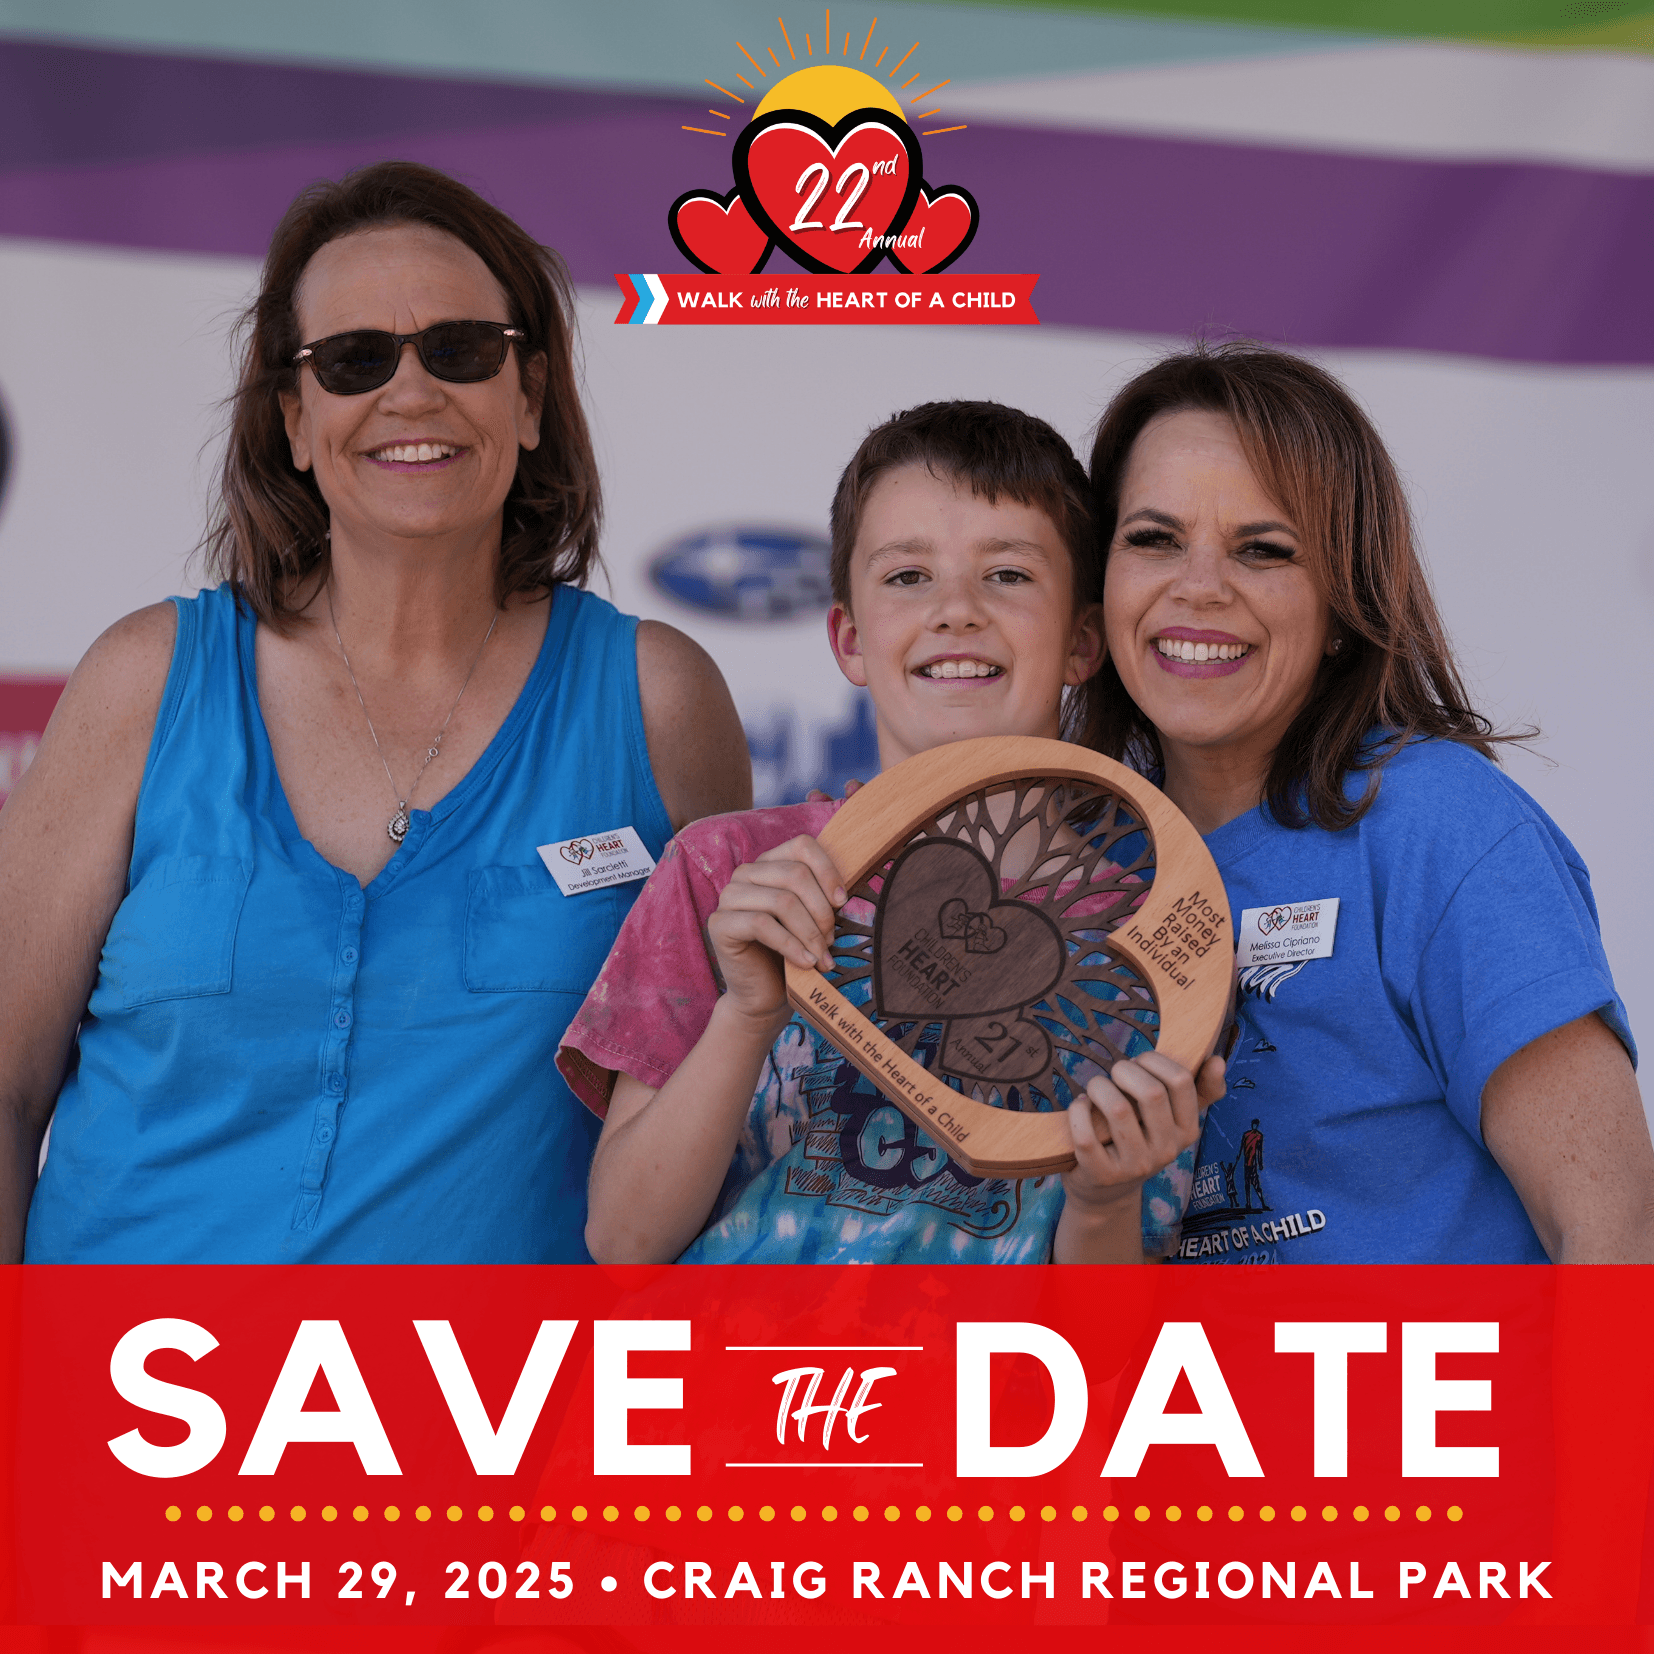 22nd Annual Walk with the Heart of a Child